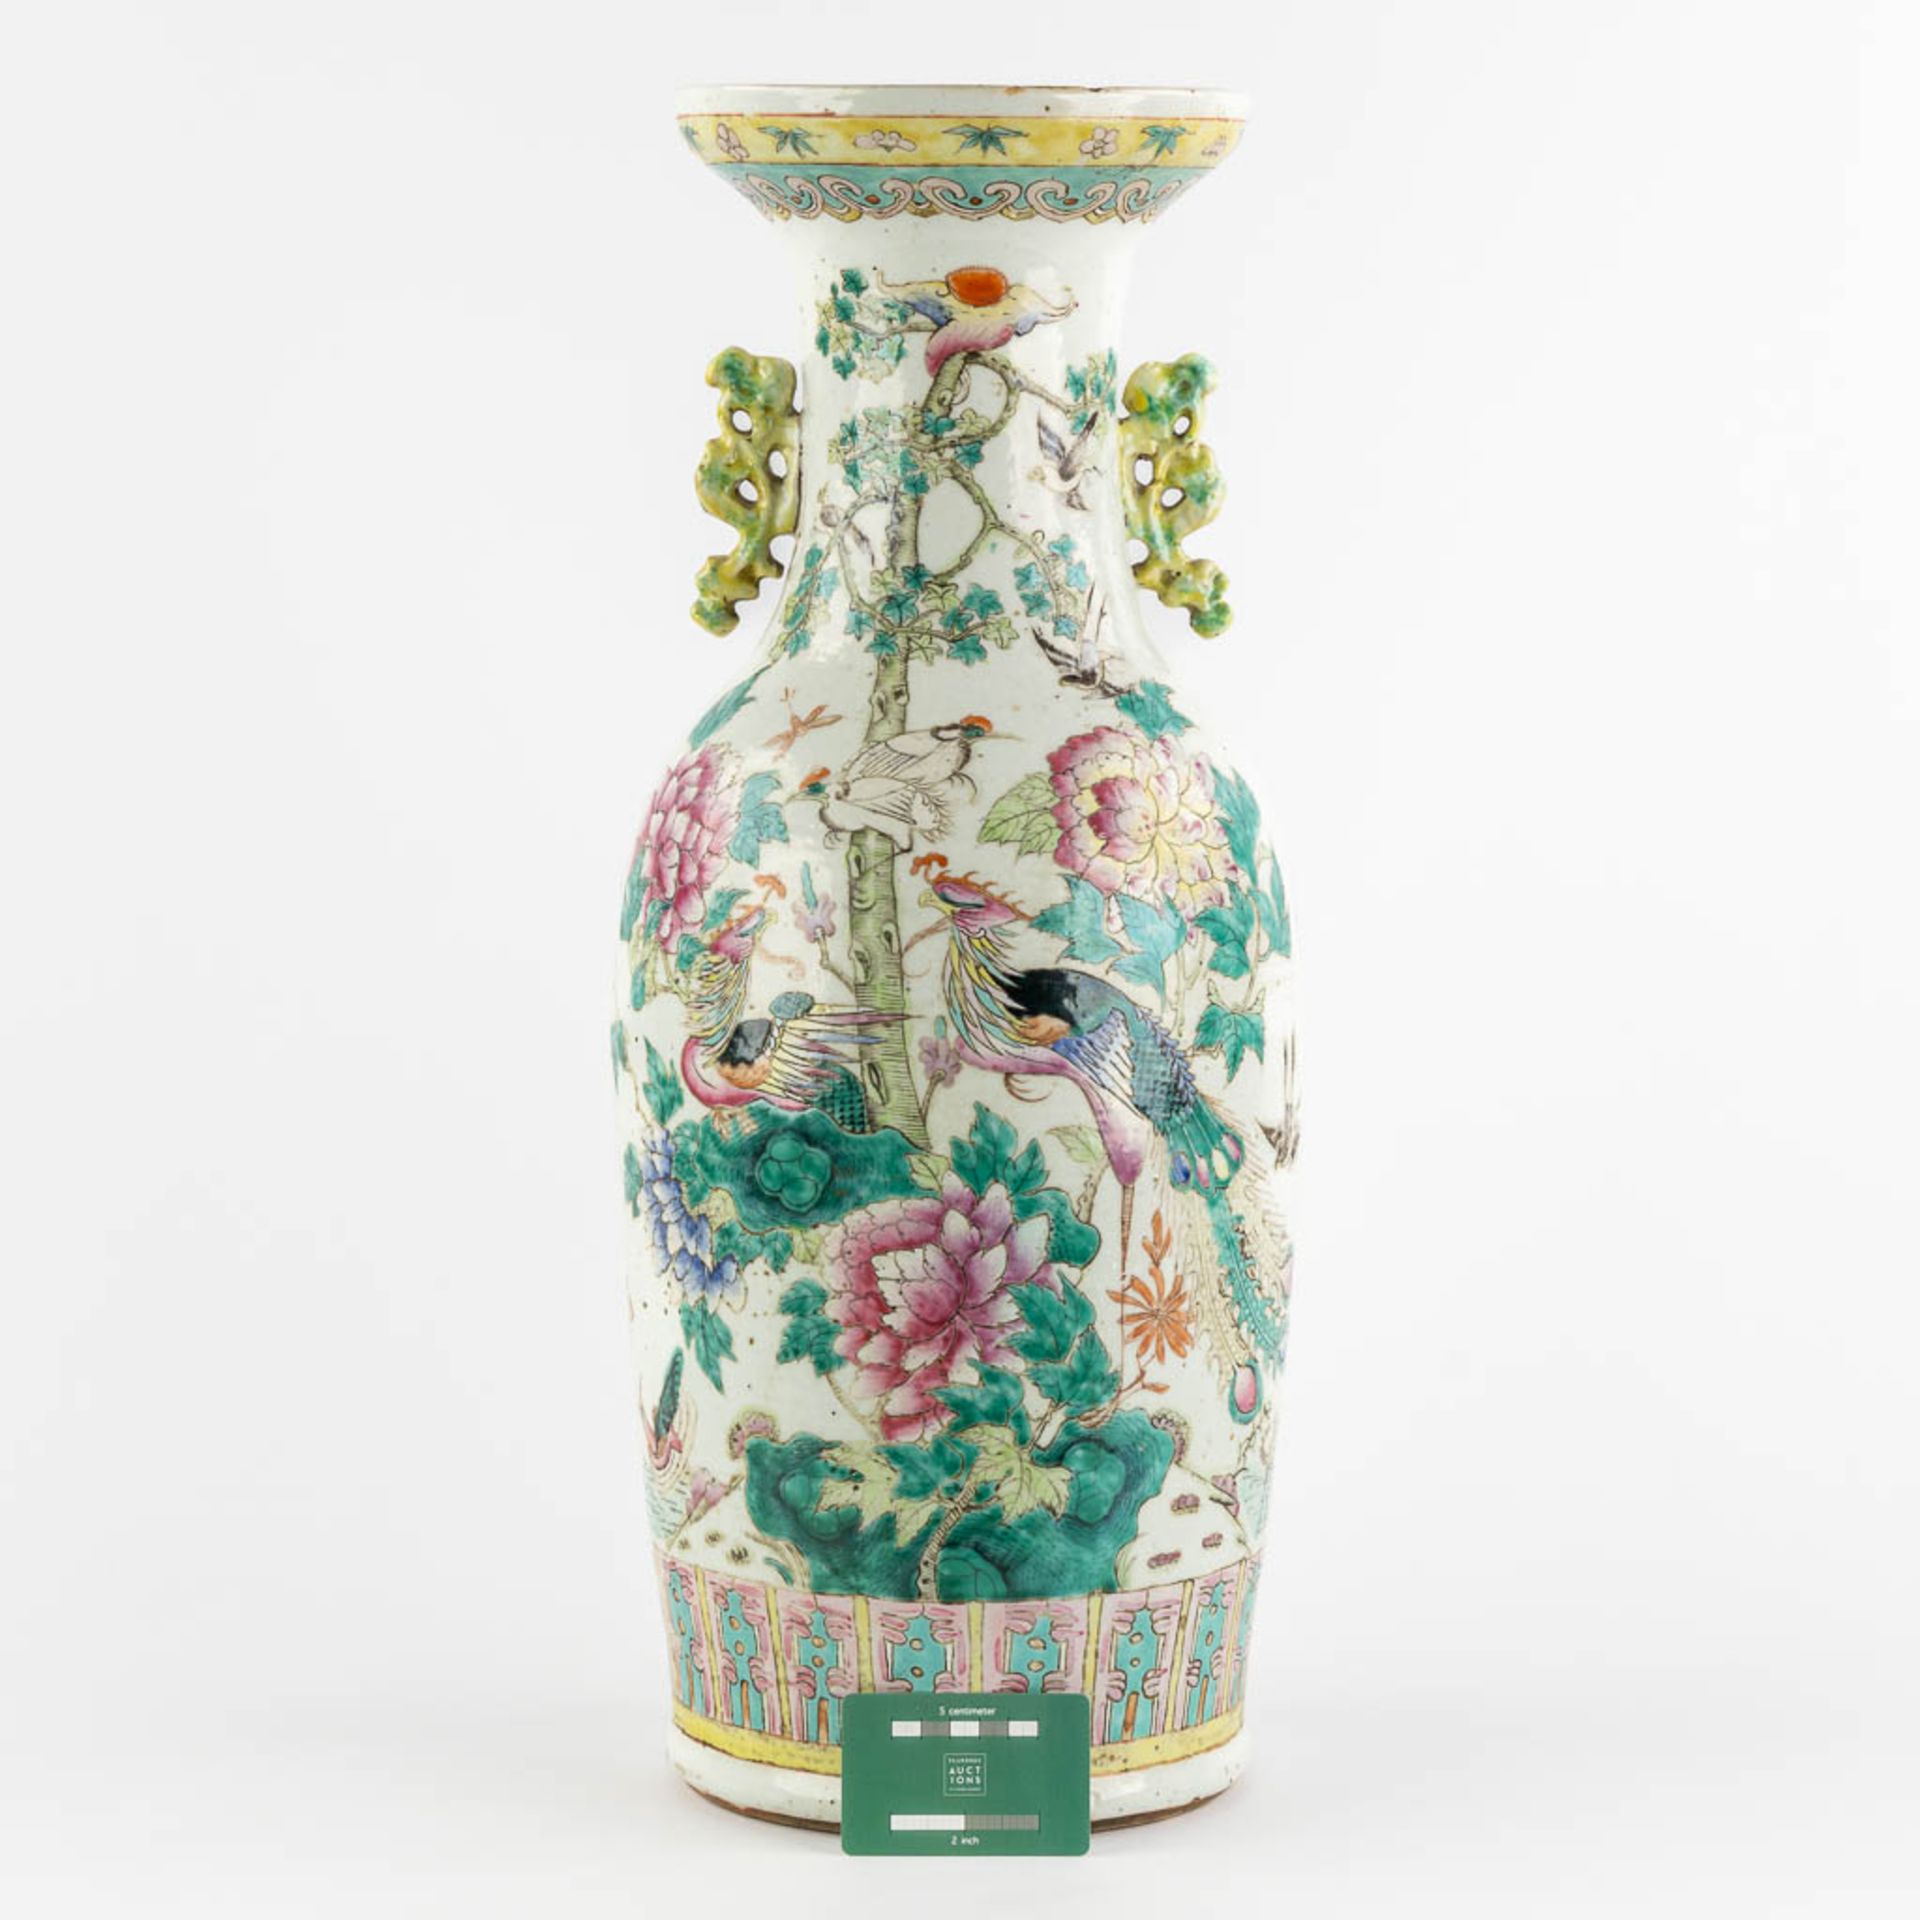 A Chinese Vase, Famille Rose decorated with Fauna and Flora. (H:60 x D:25 cm) - Image 2 of 12